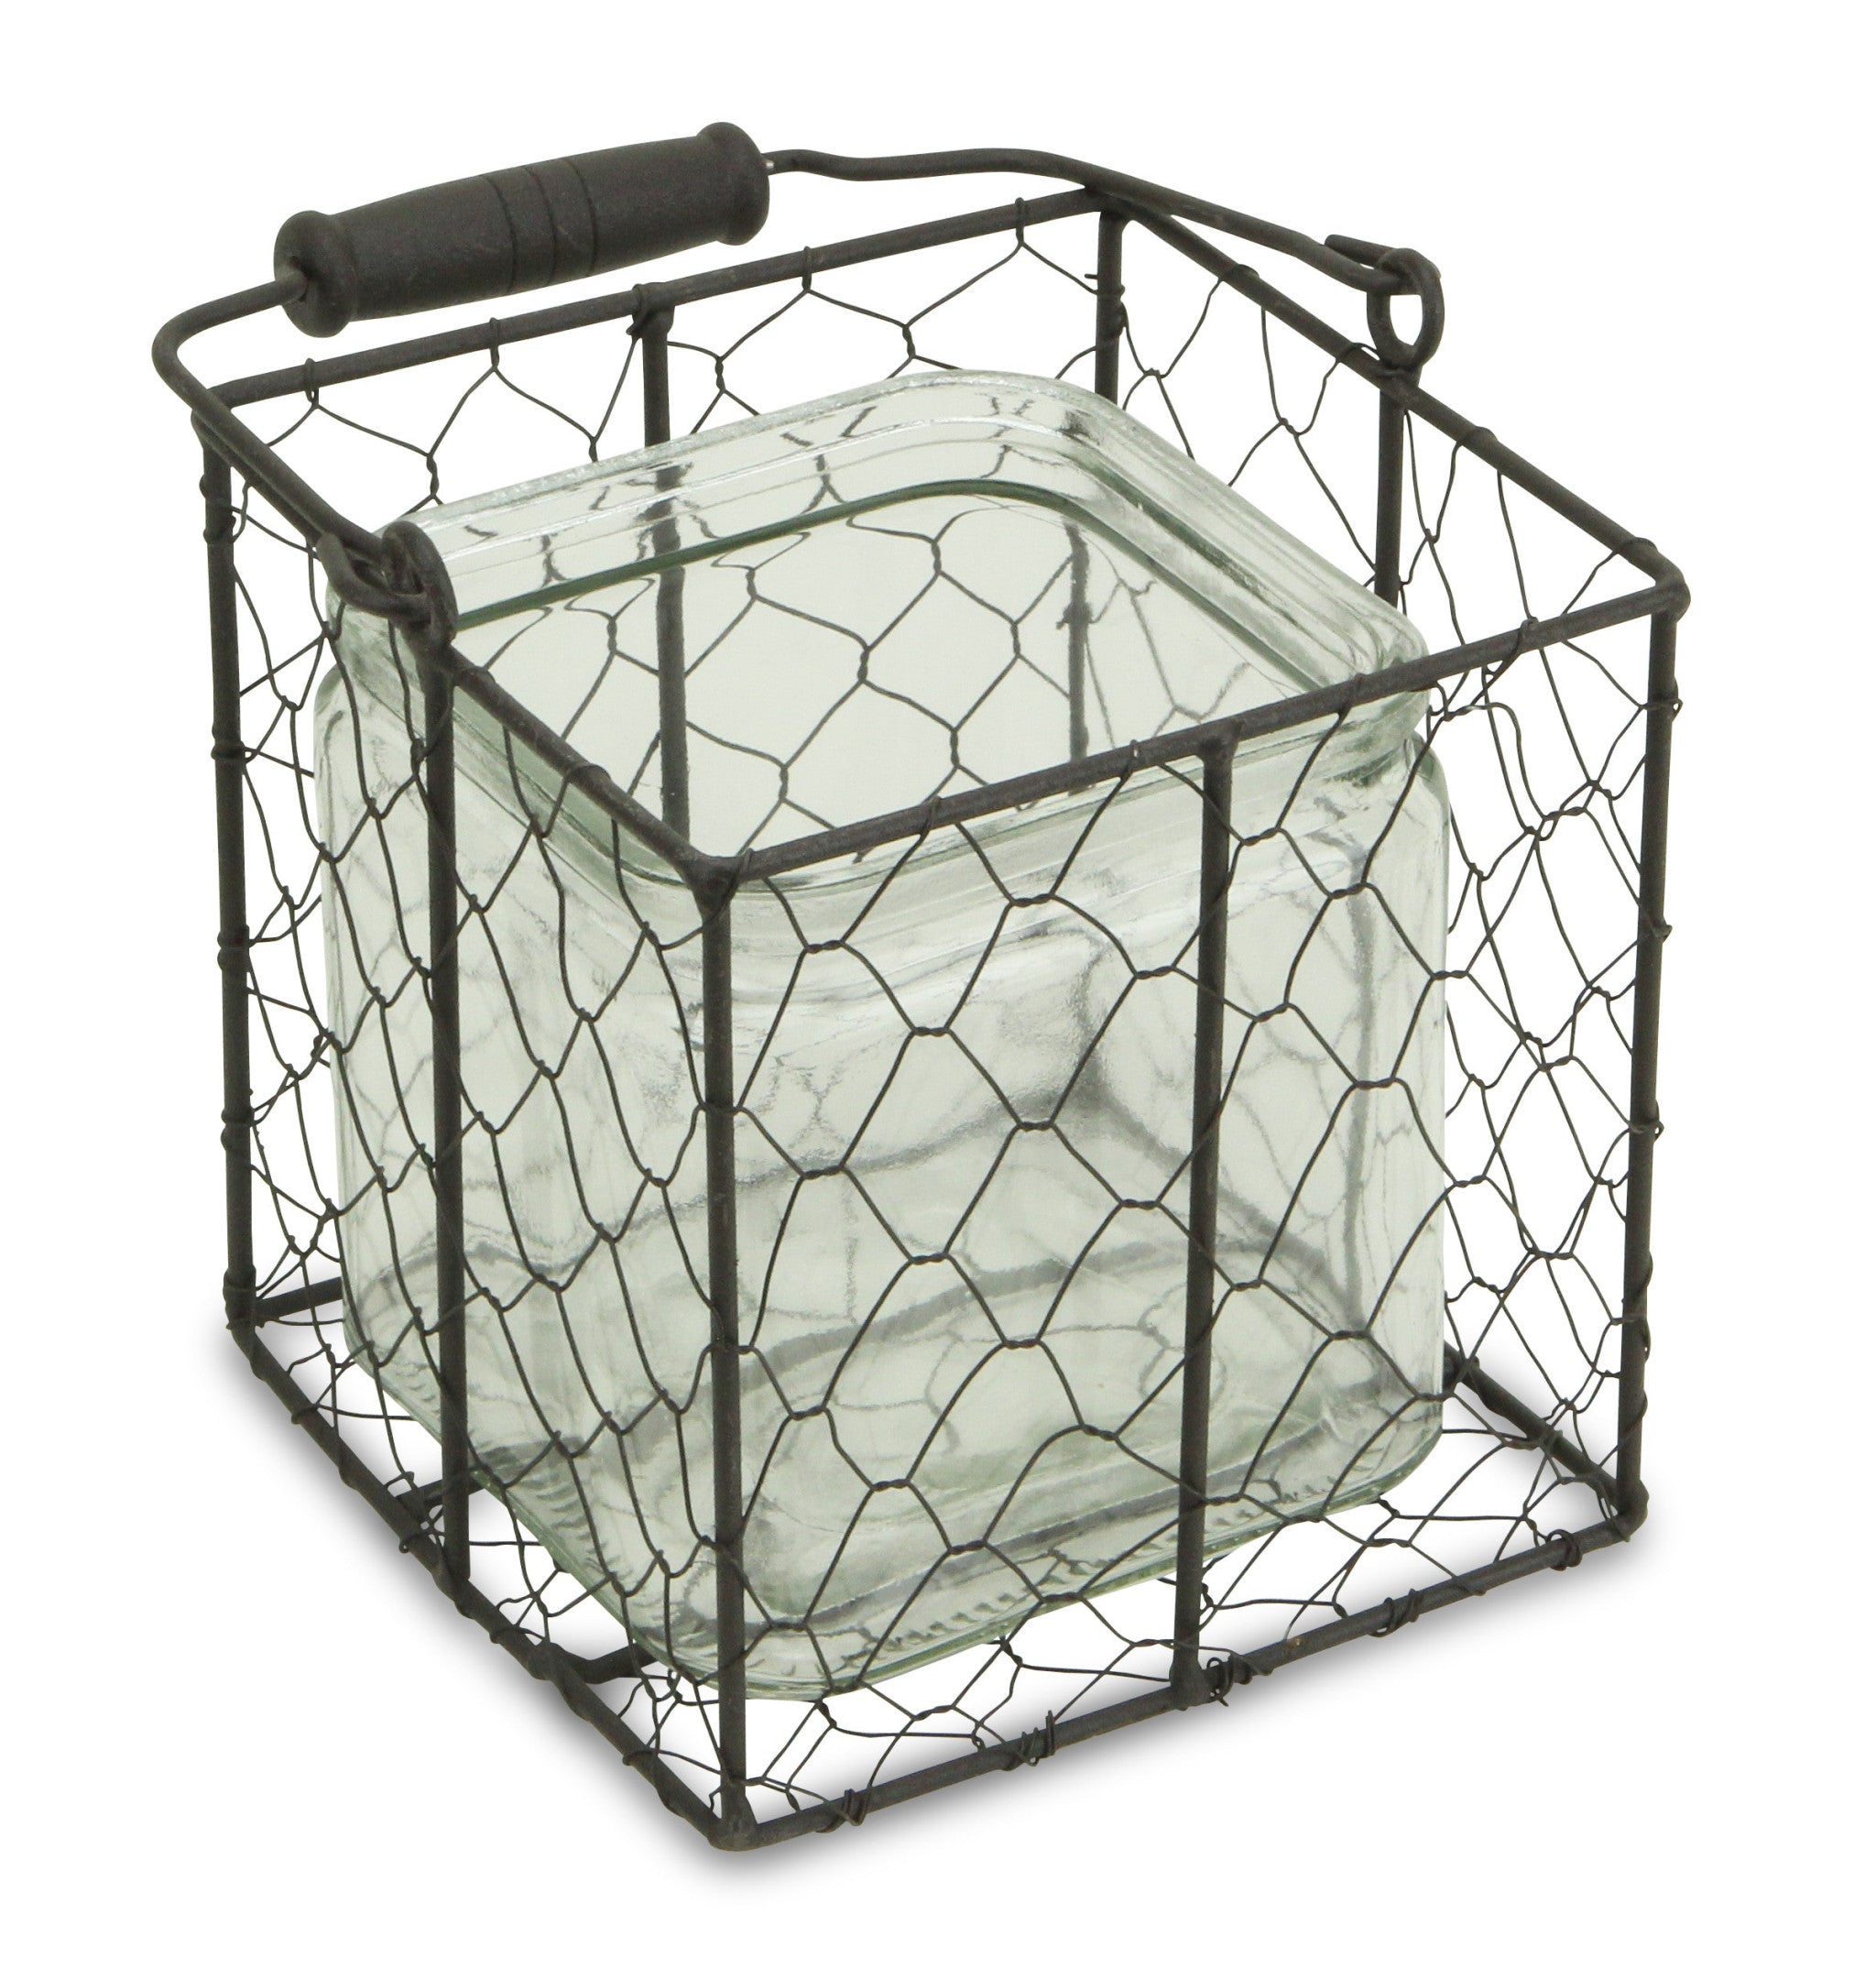 5.5" Brown and Clear Square Wire Basket and Glass Jar